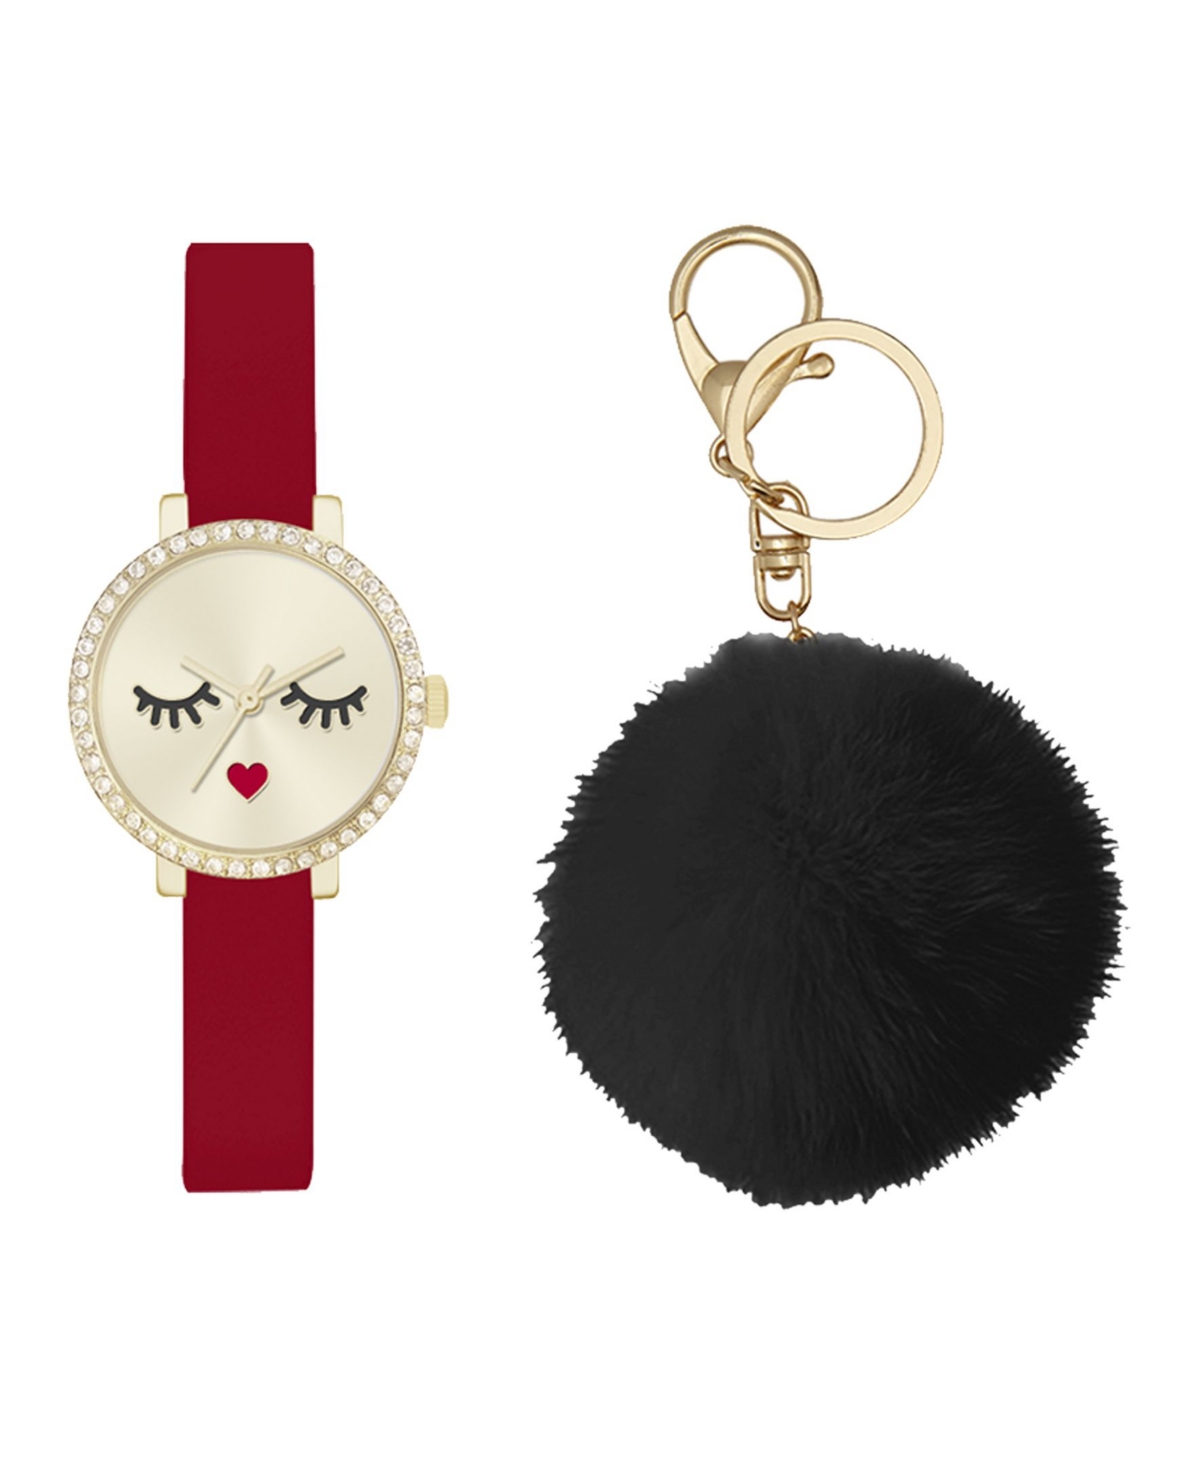 Women's Analog Red Strap Glam Watch 28mm with Black Fluff Ball Key Chain Cubic Zirconia Gift Set - Red